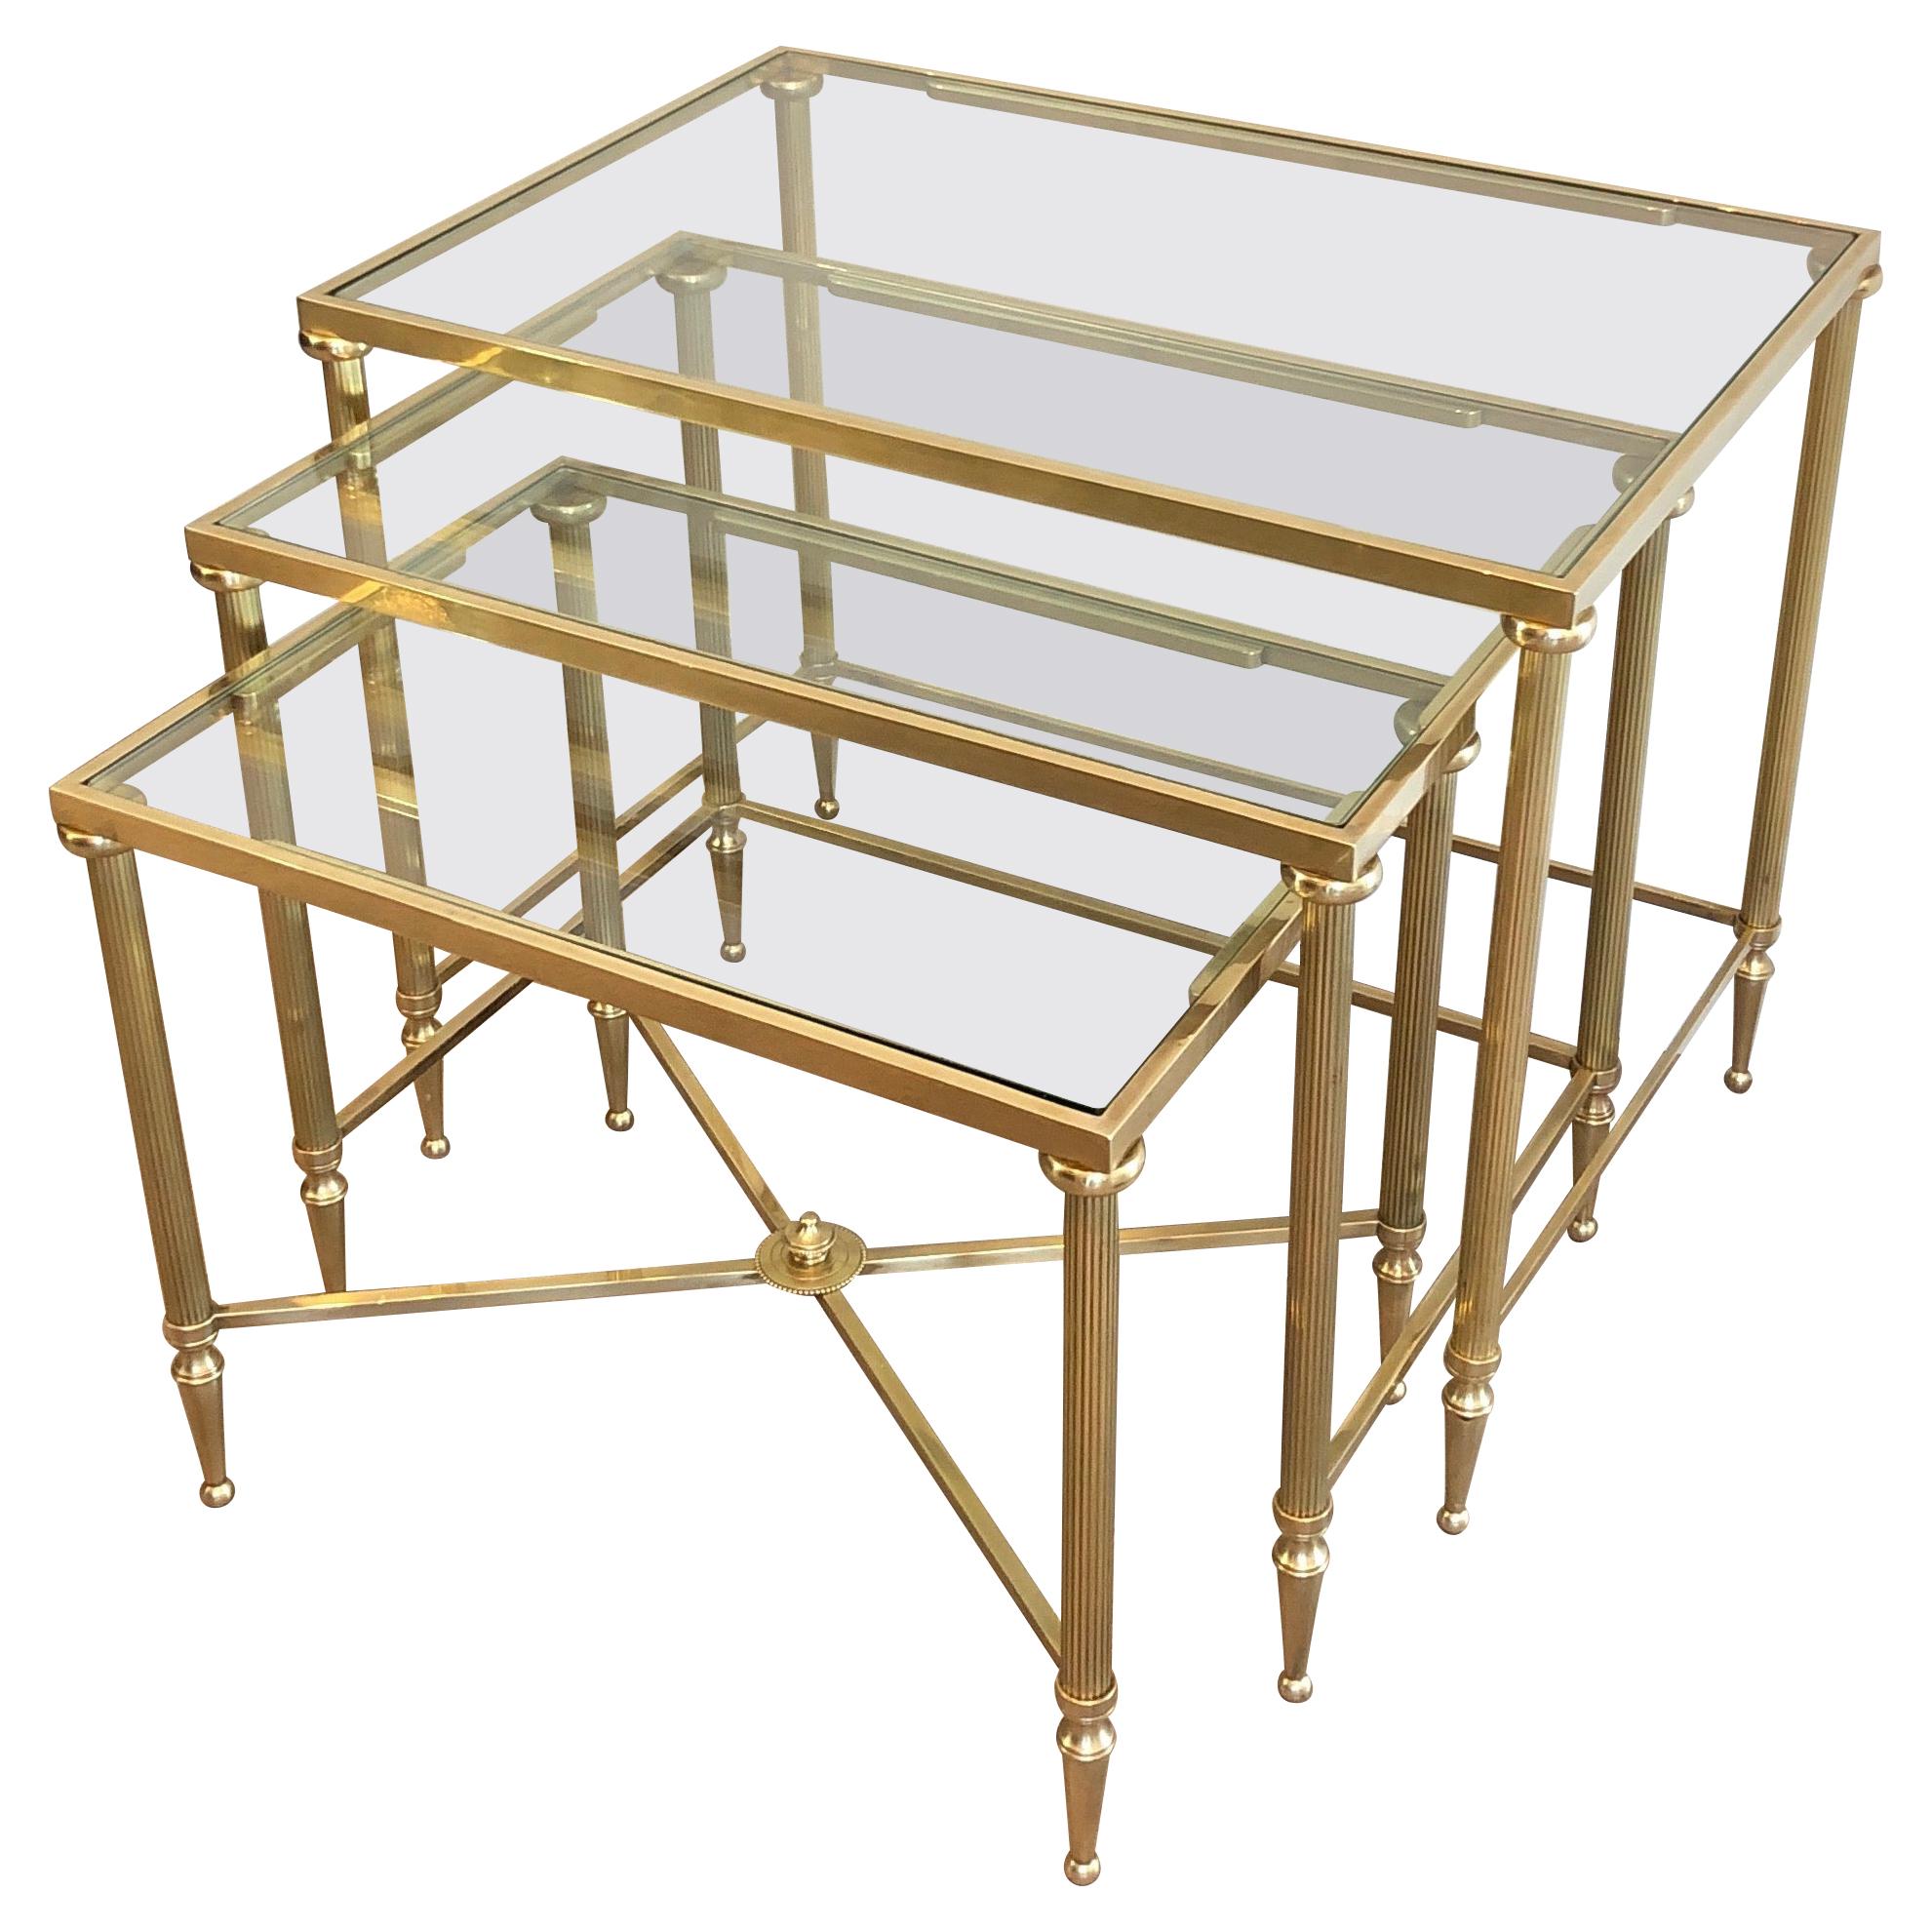 Maison Jansen, Set of 3 Brass and Glass Nesting Tables, French, Circa 1940